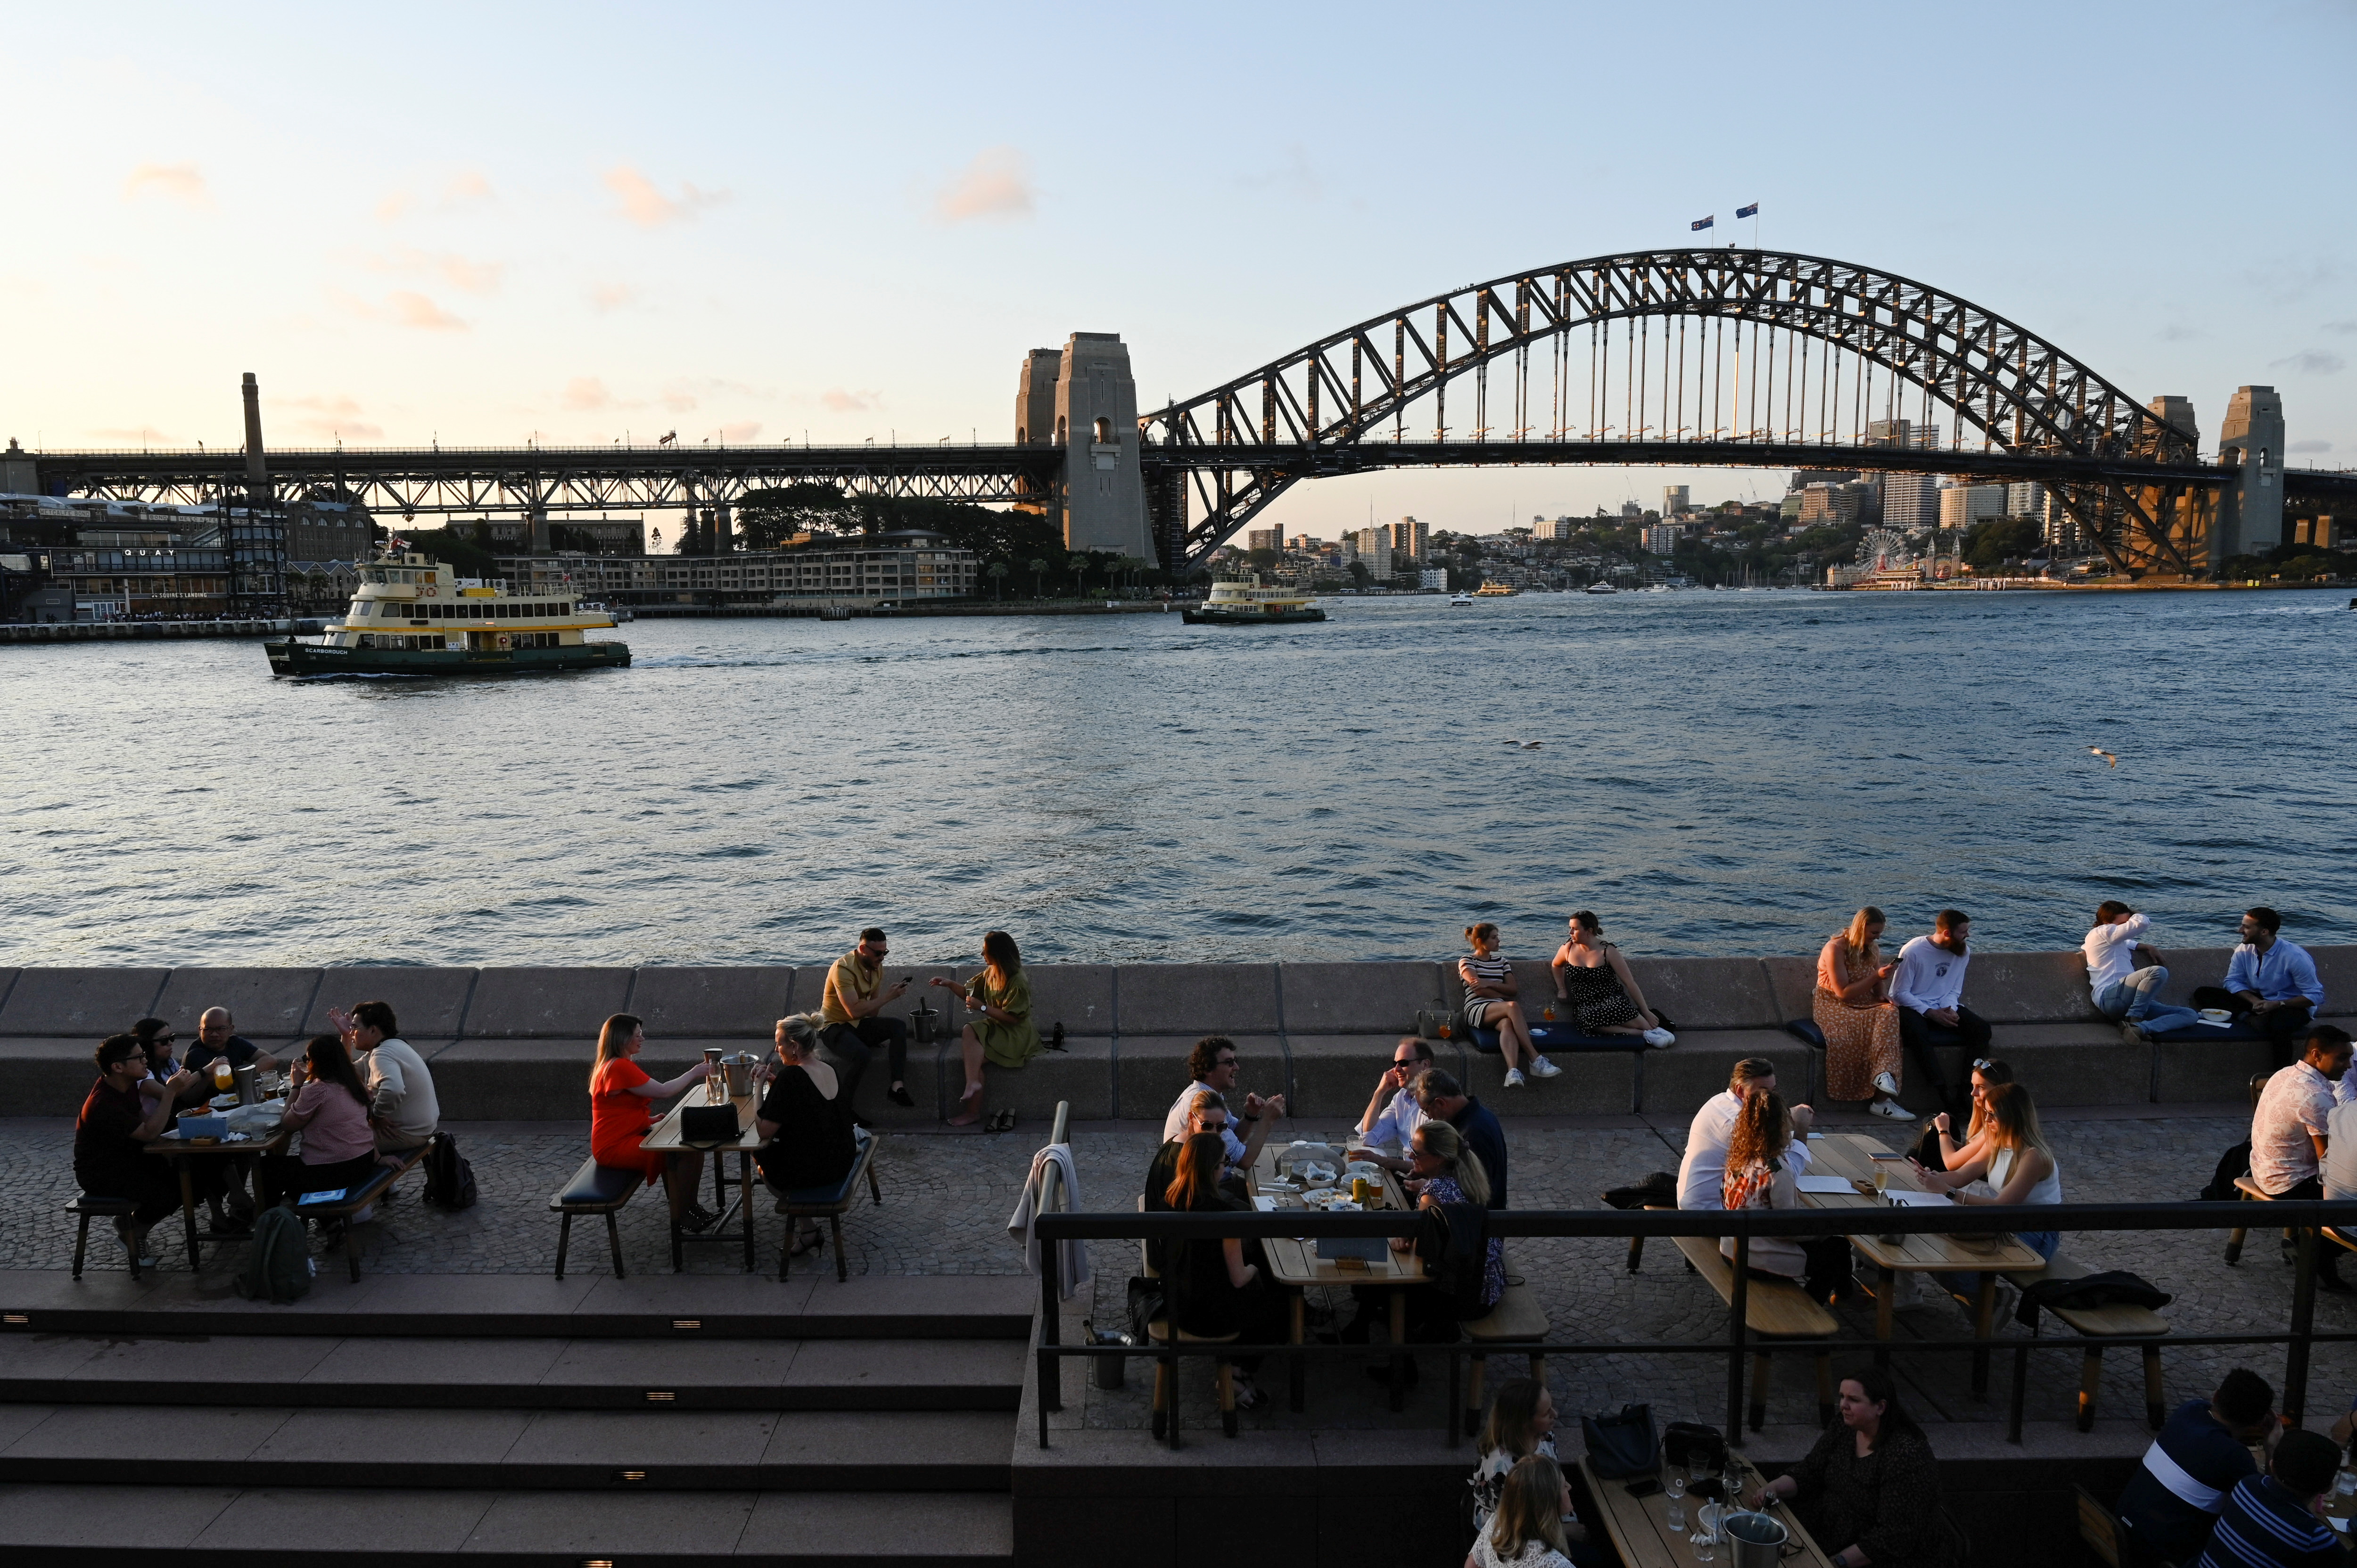 Patrons dine-in at a bar by the harbour in the wake of coronavirus disease (COVID-19) regulations easing, following an extended lockdown to curb an outbreak, in Sydney, Australia, October 22, 2021. REUTERS/Jaimi Joy